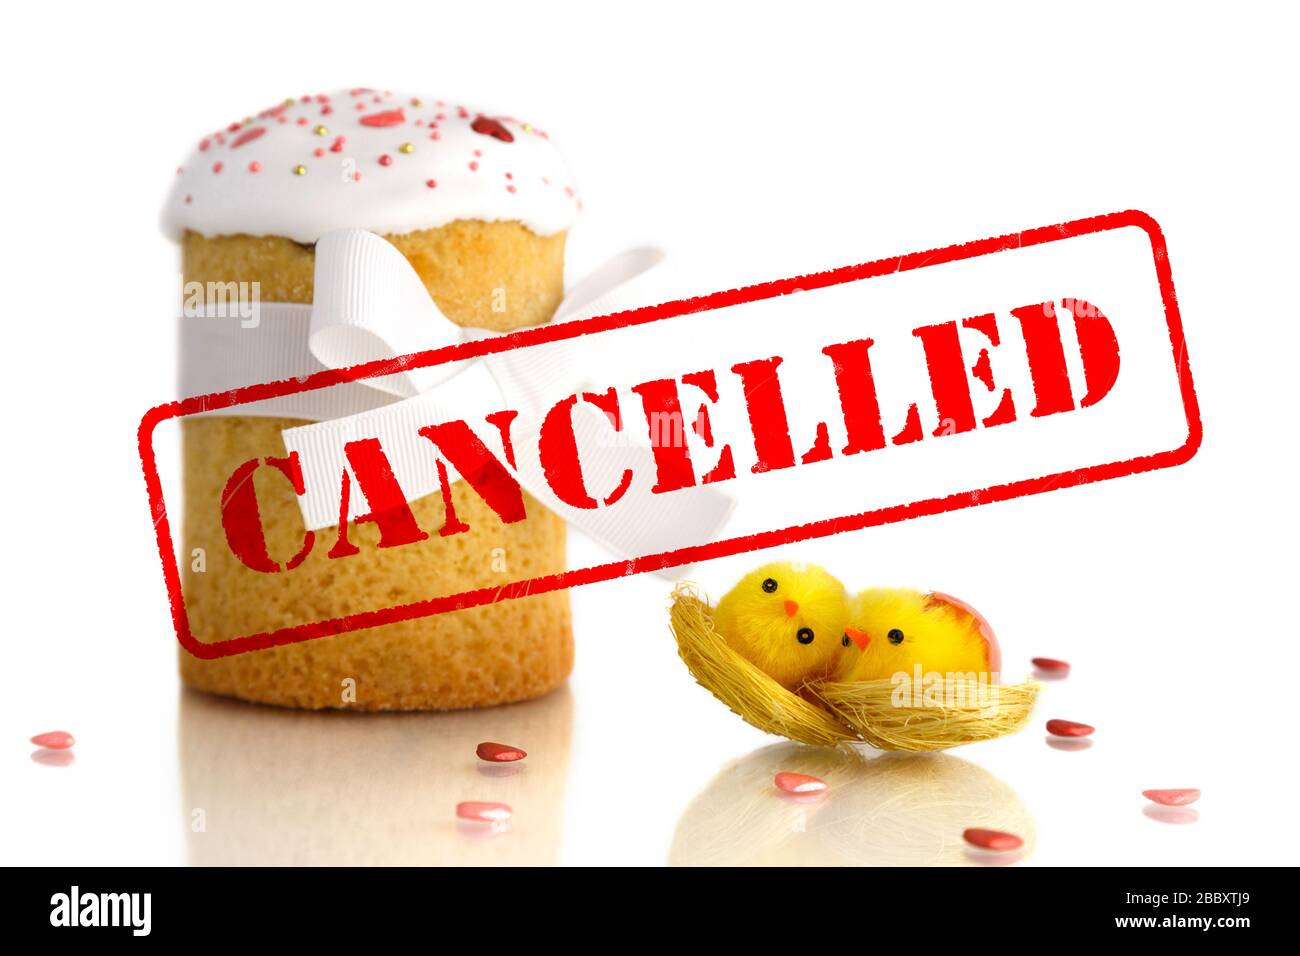 Cancellation of Easter celebration because of coronavirus. Quarantined Easter, stay home concept. Traditional Easter cake with two yellow chicks Stock Photo